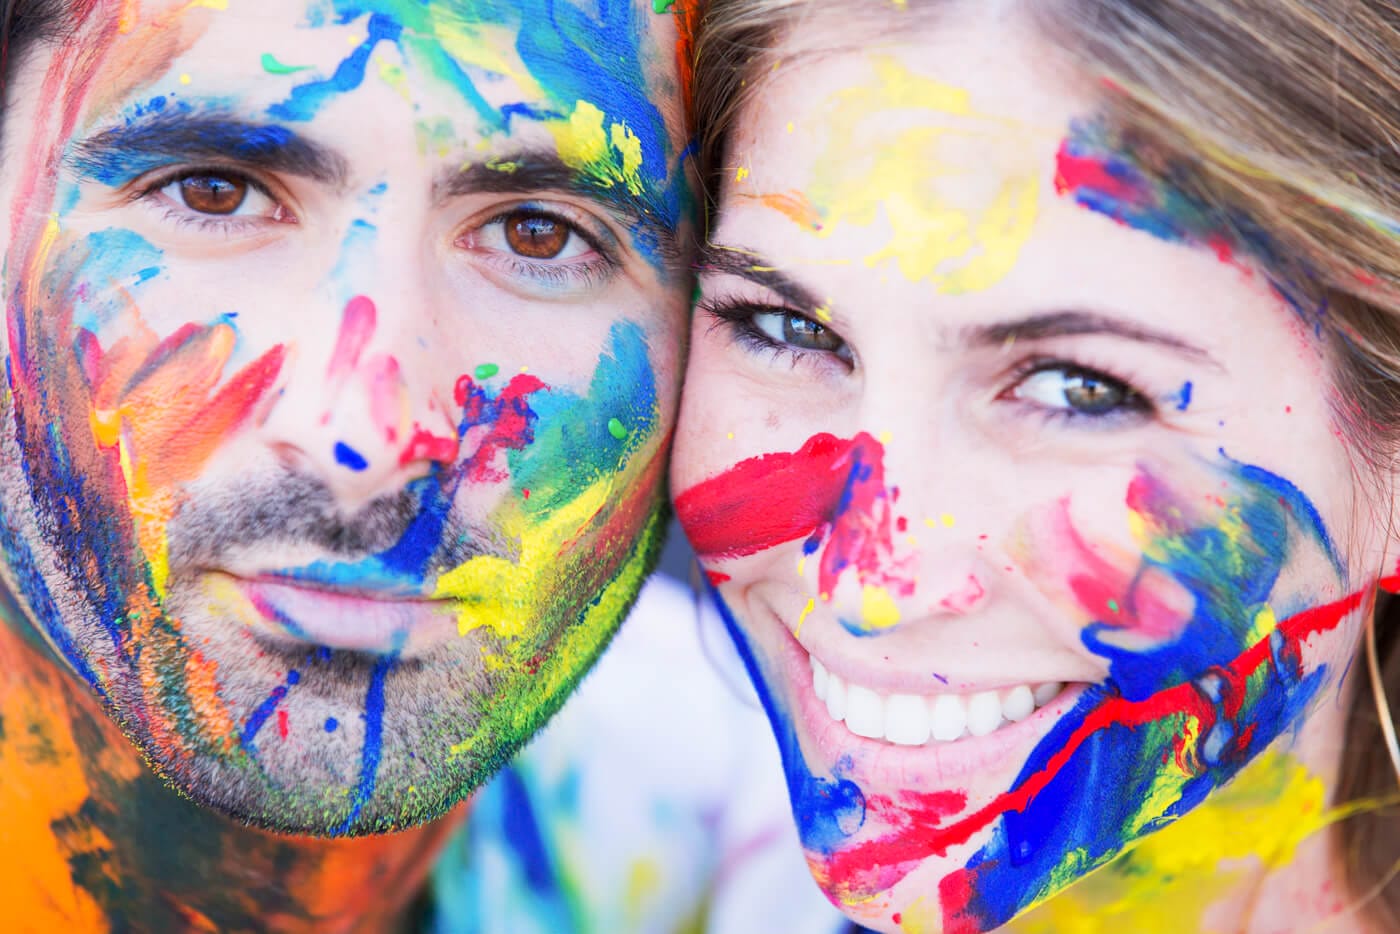 Playful NYC Engagement Photo of a couple using colorful face paint to creatively personalize their gallery.